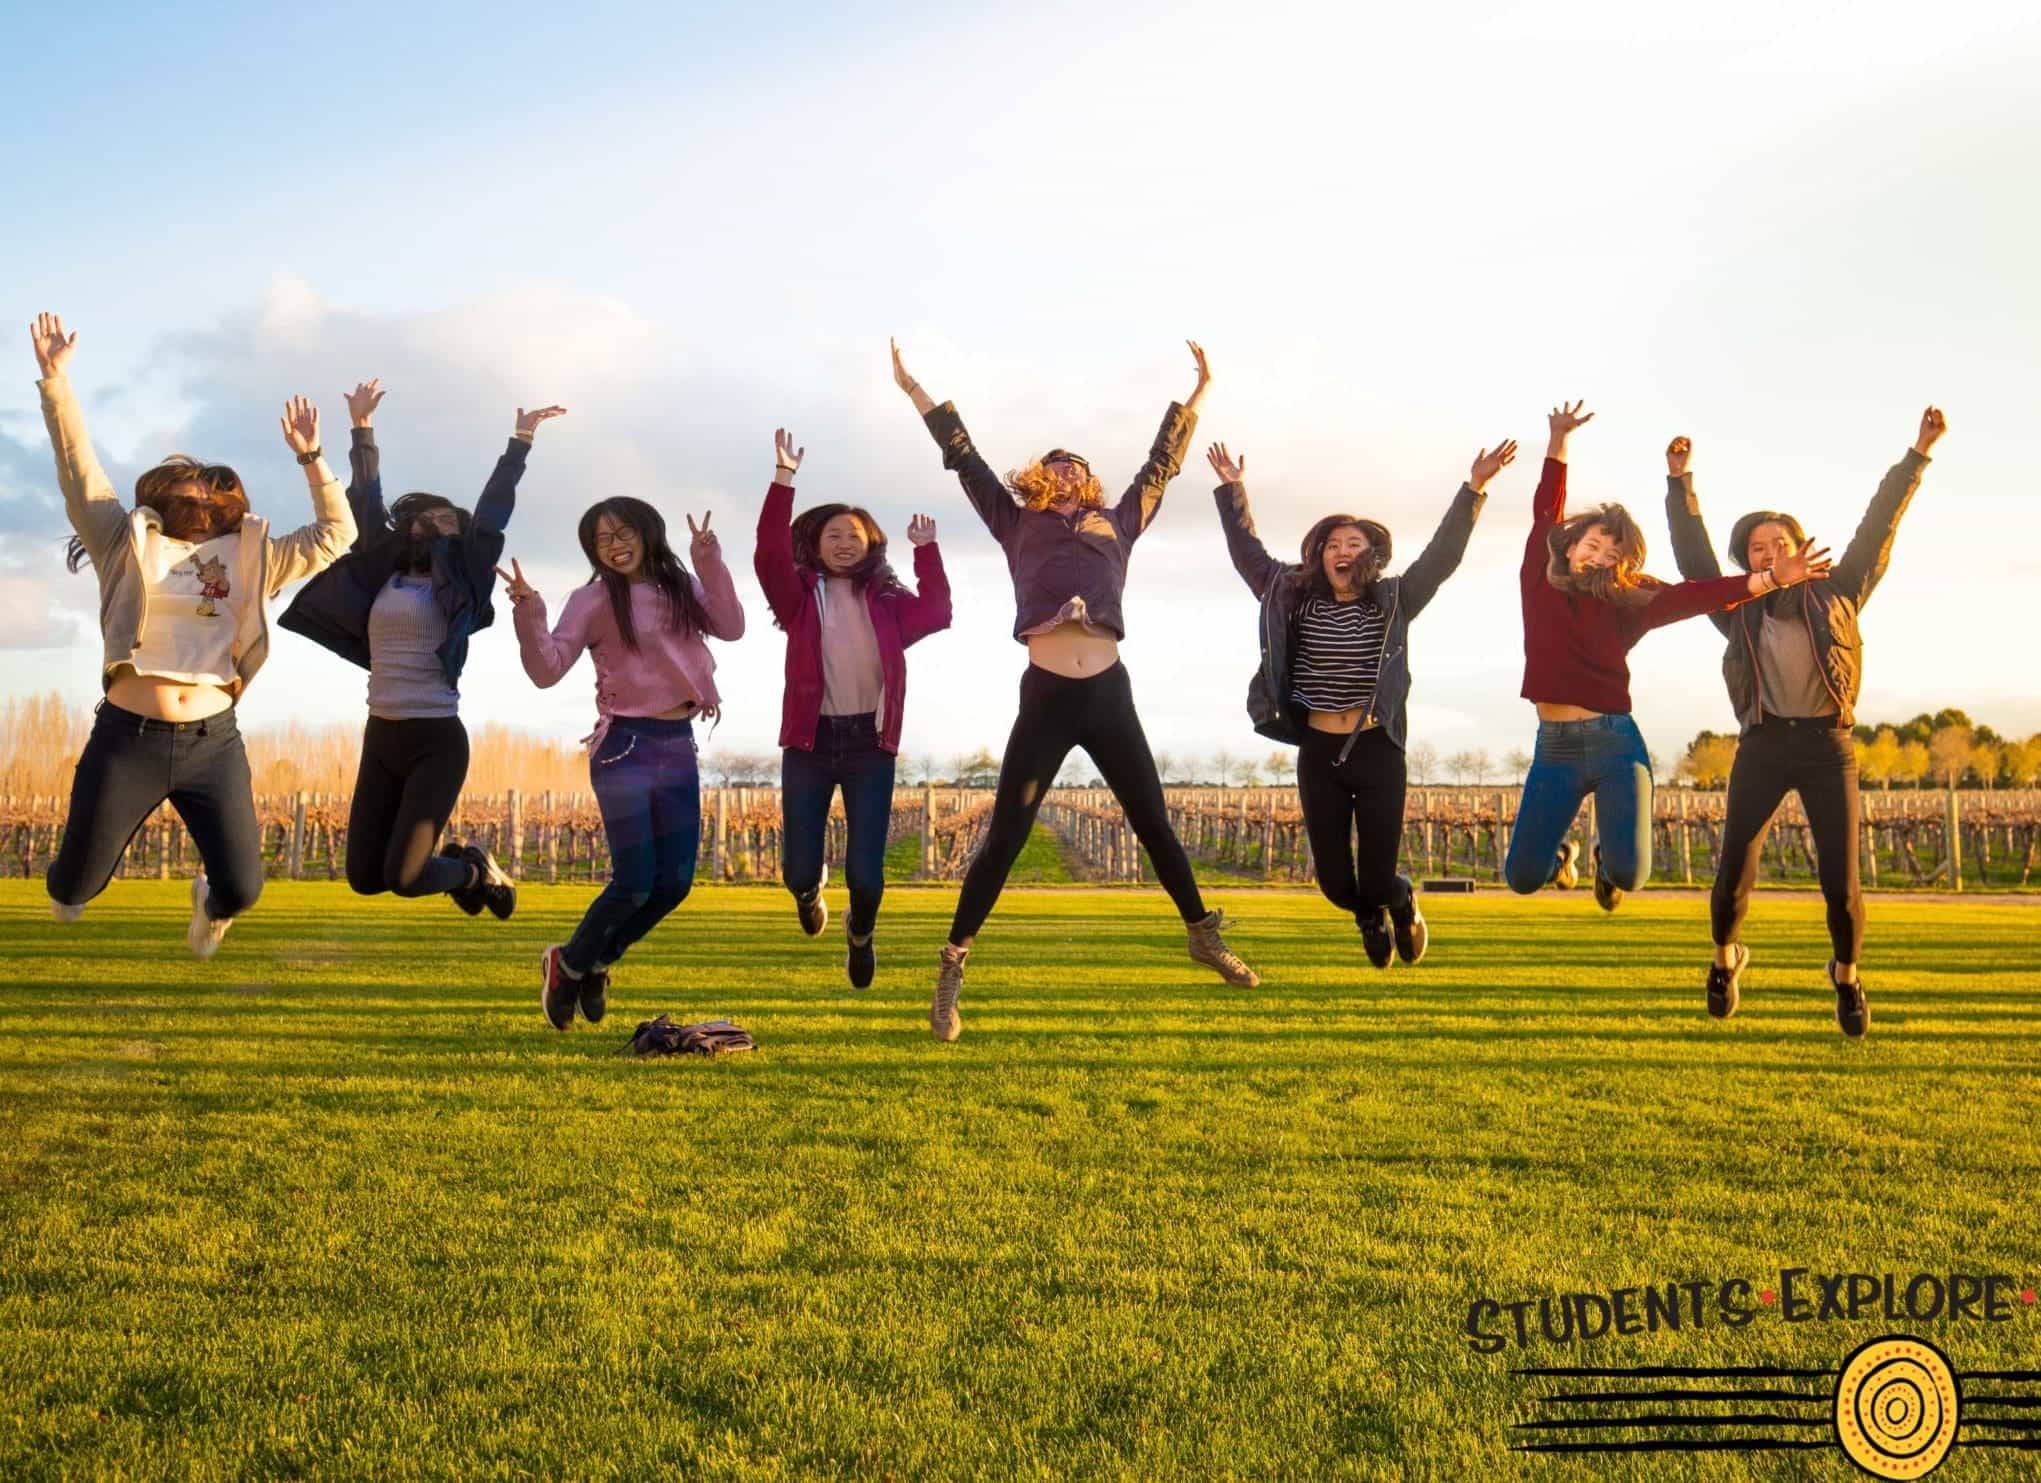 Students in a jump pose at a grass field